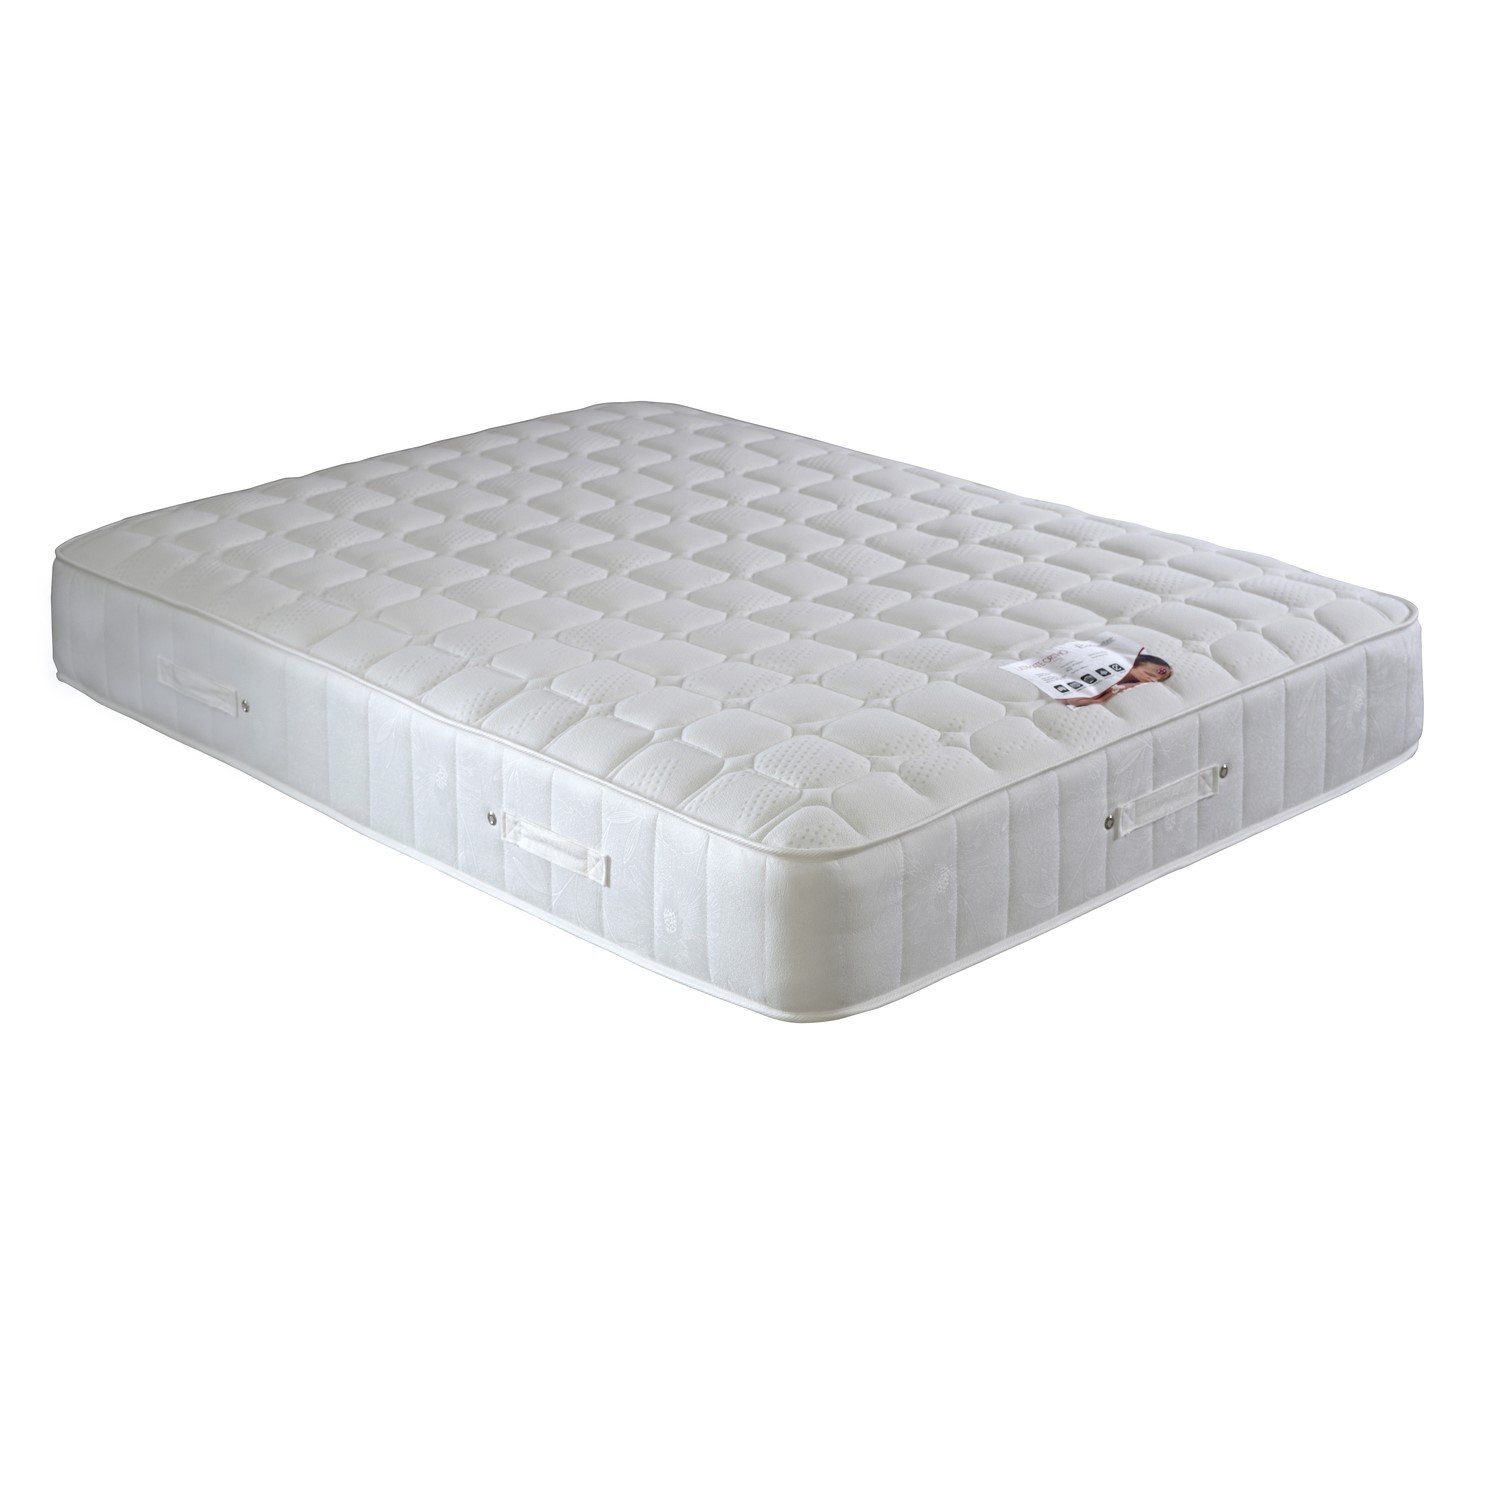 Read more about Single orthopaedic 1000 pocket sprung quilted mattress ultimate ortho